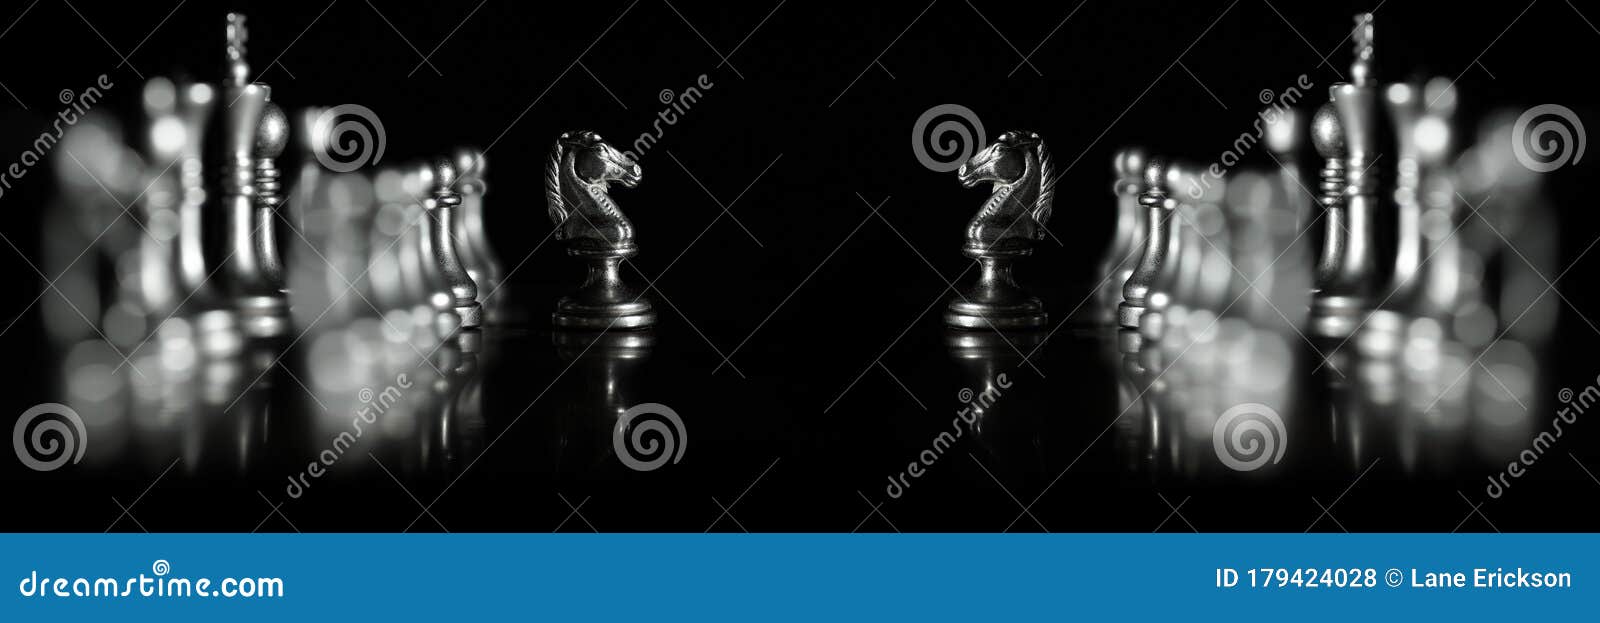 pieces on chess board for playing game and strategy competition face off